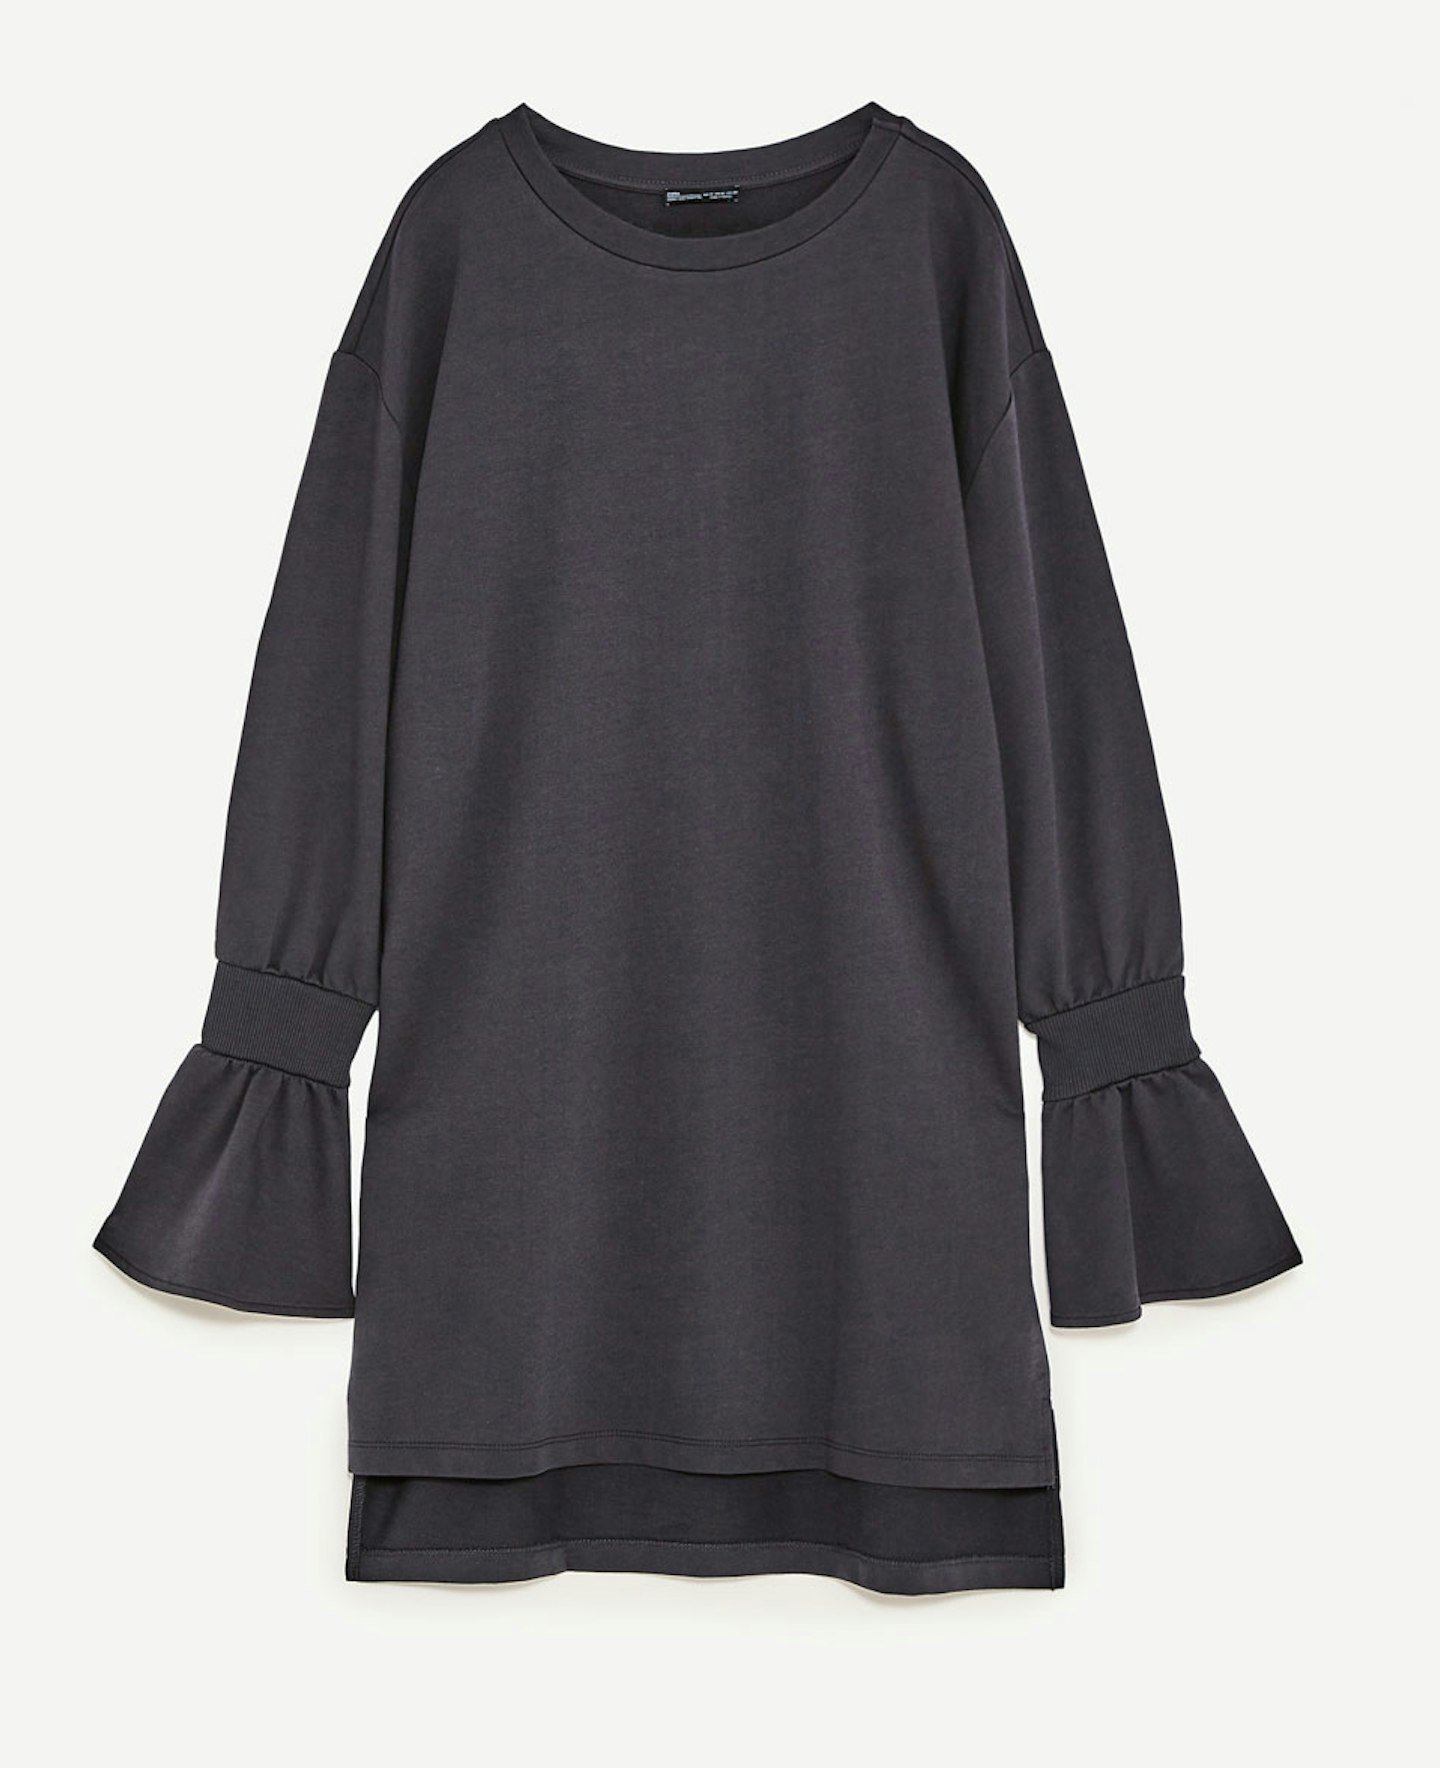 The Best Bargains From Zara's Special Prices Tab - Grazia